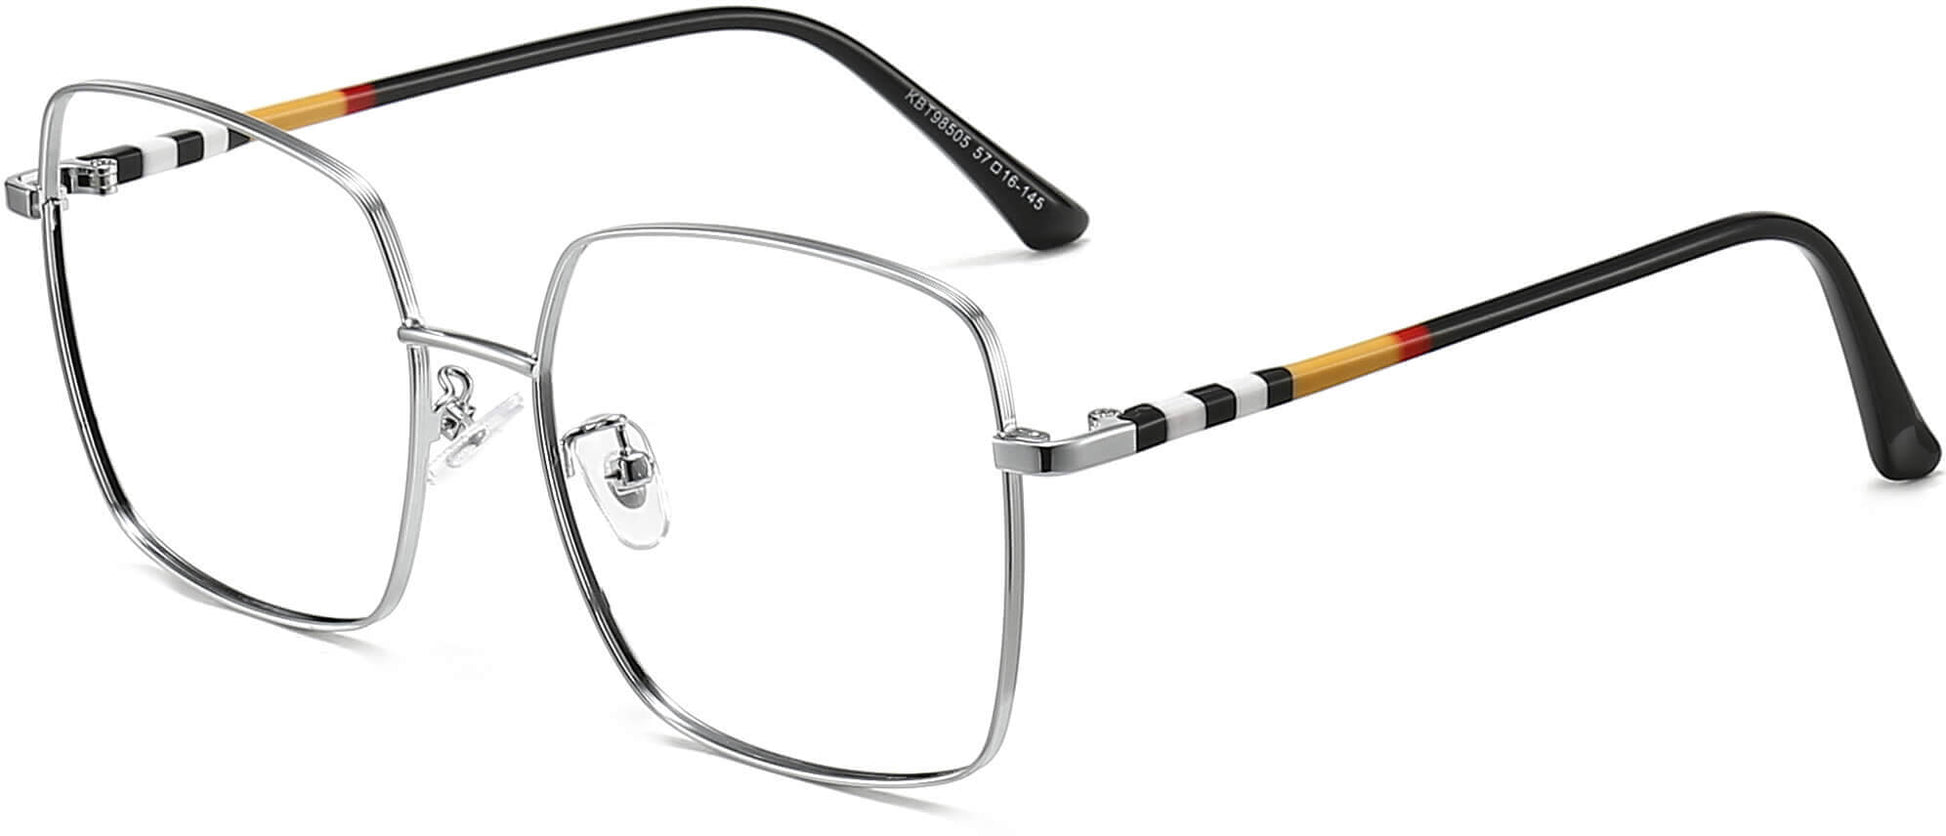 Melody Square Silver Eyeglasses from ANRRI from ANRRI, angle view